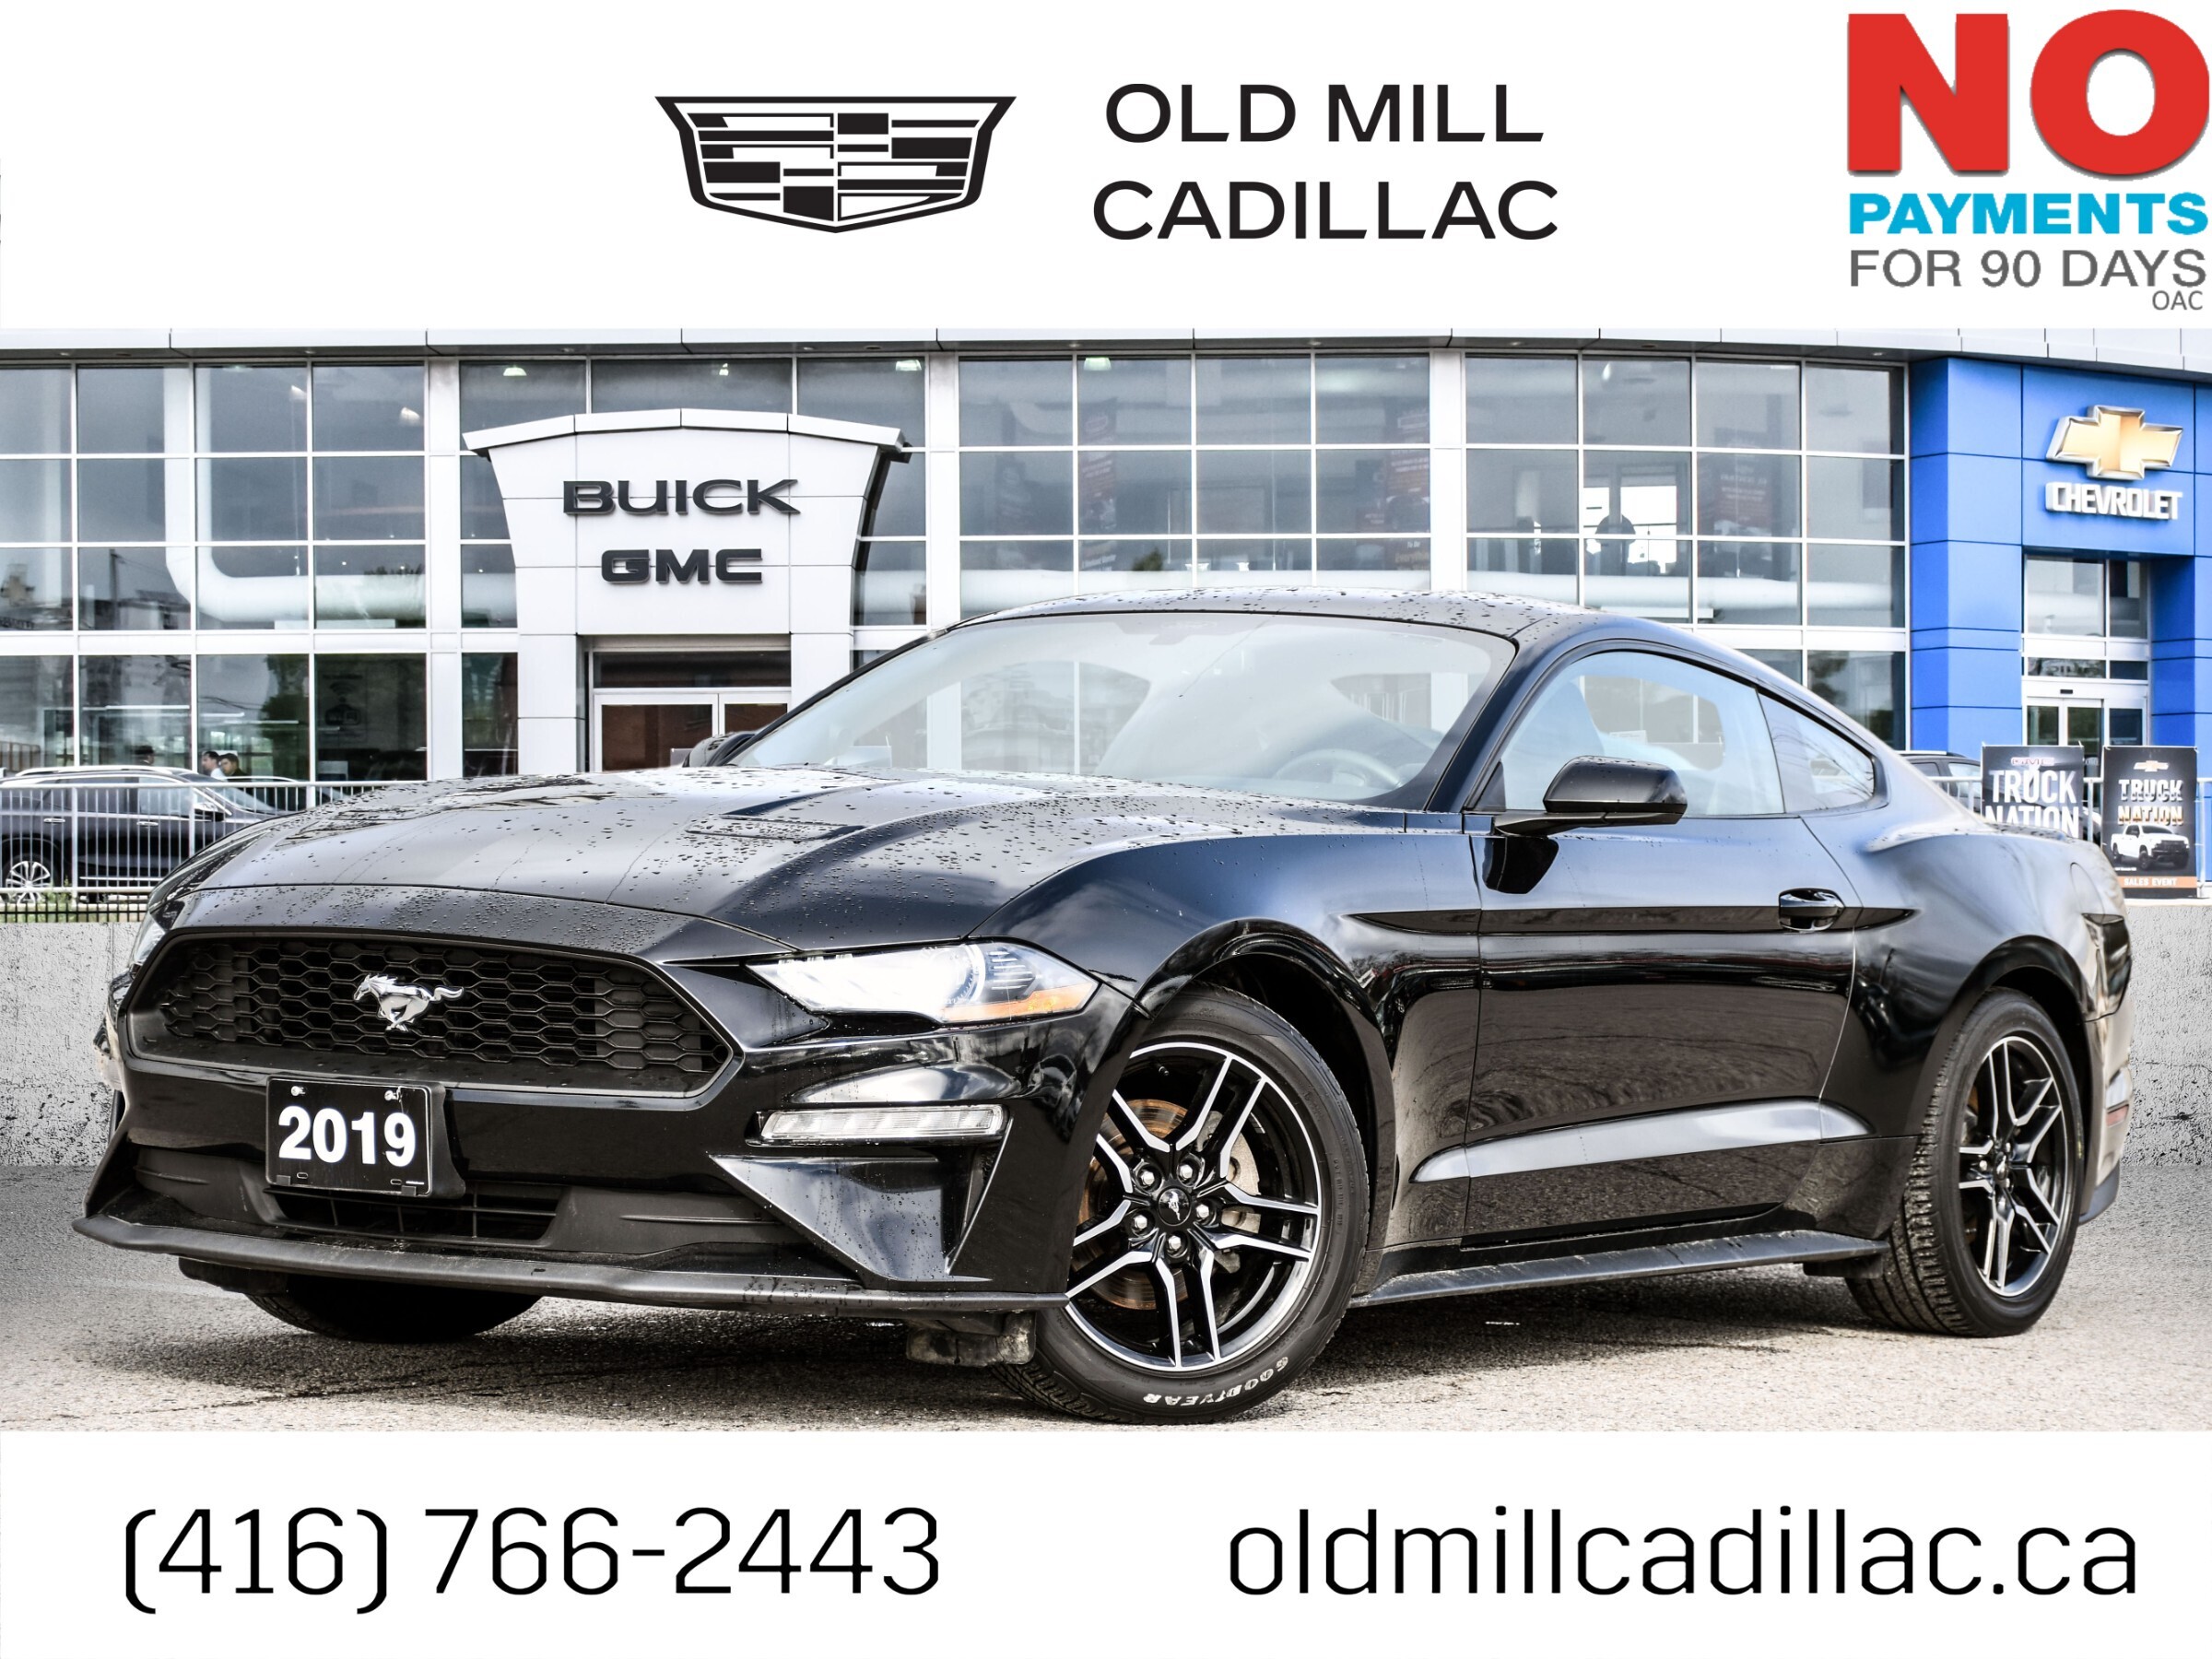 2019 Ford Mustang SOLD!